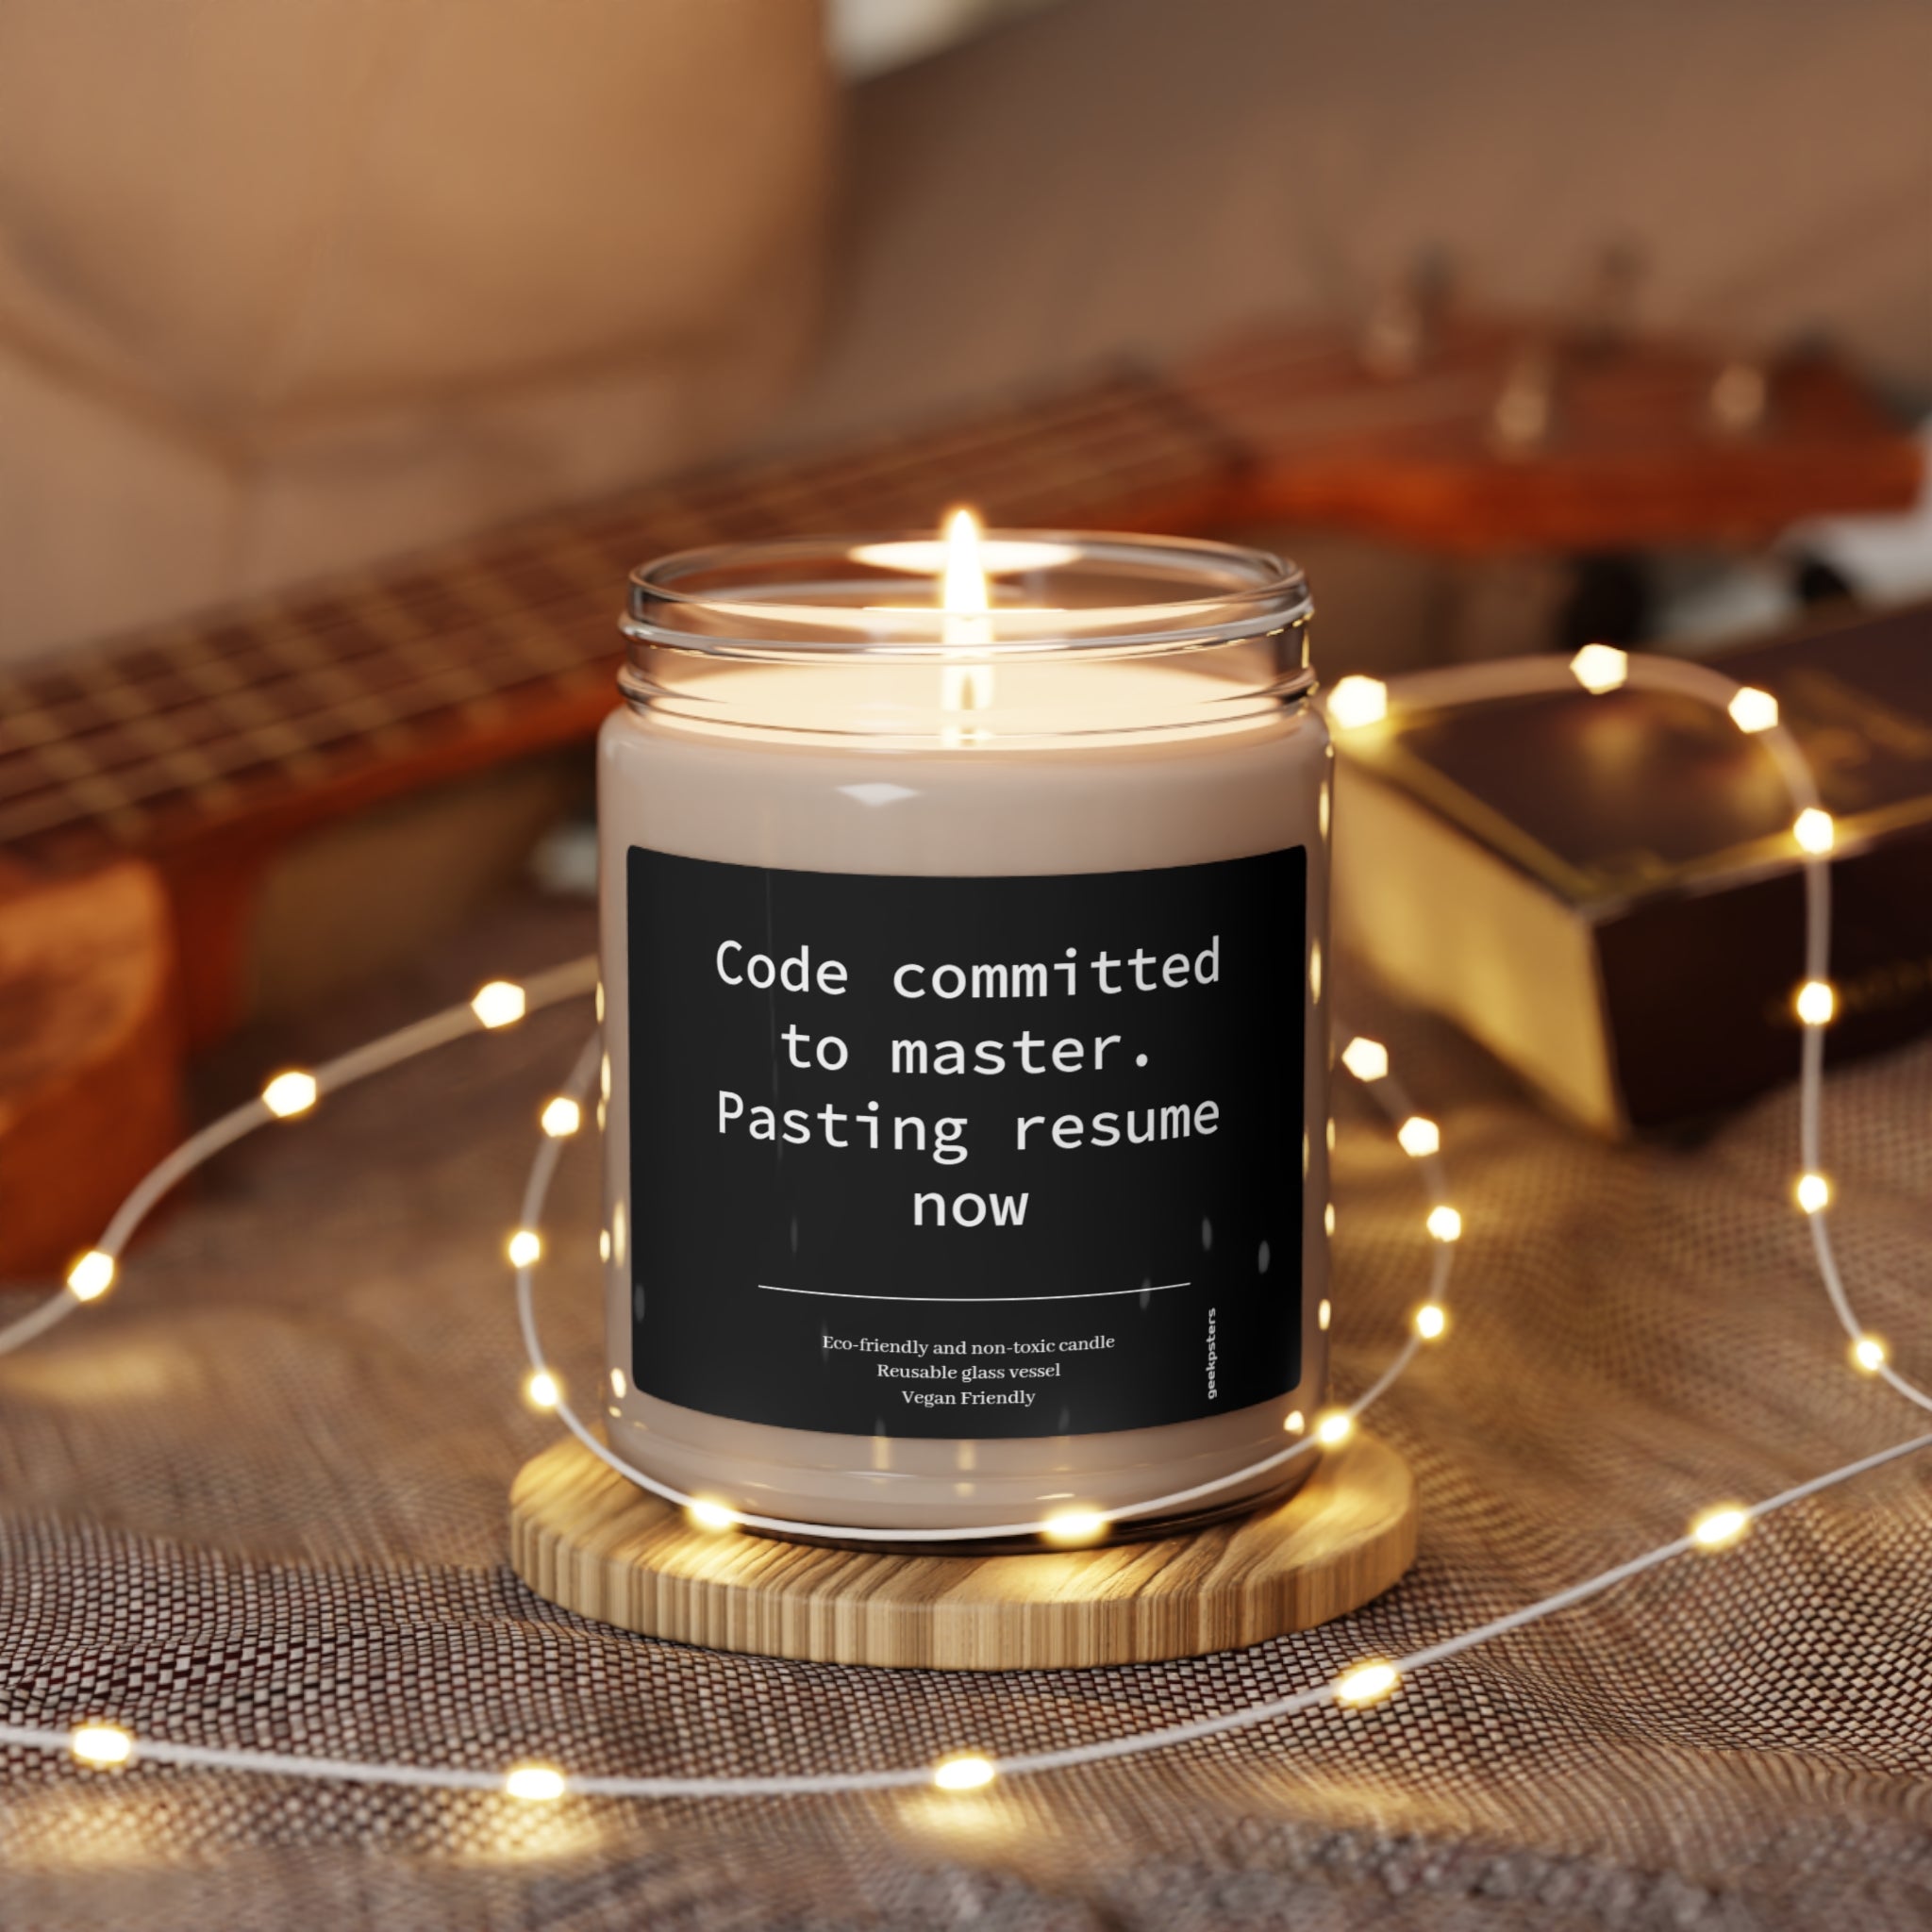 A Code Committed to Master. Pasting Resume Now- scented soy candle with humorous text about coding and job application on a cozy background with string lights, a glass jar and a guitar.